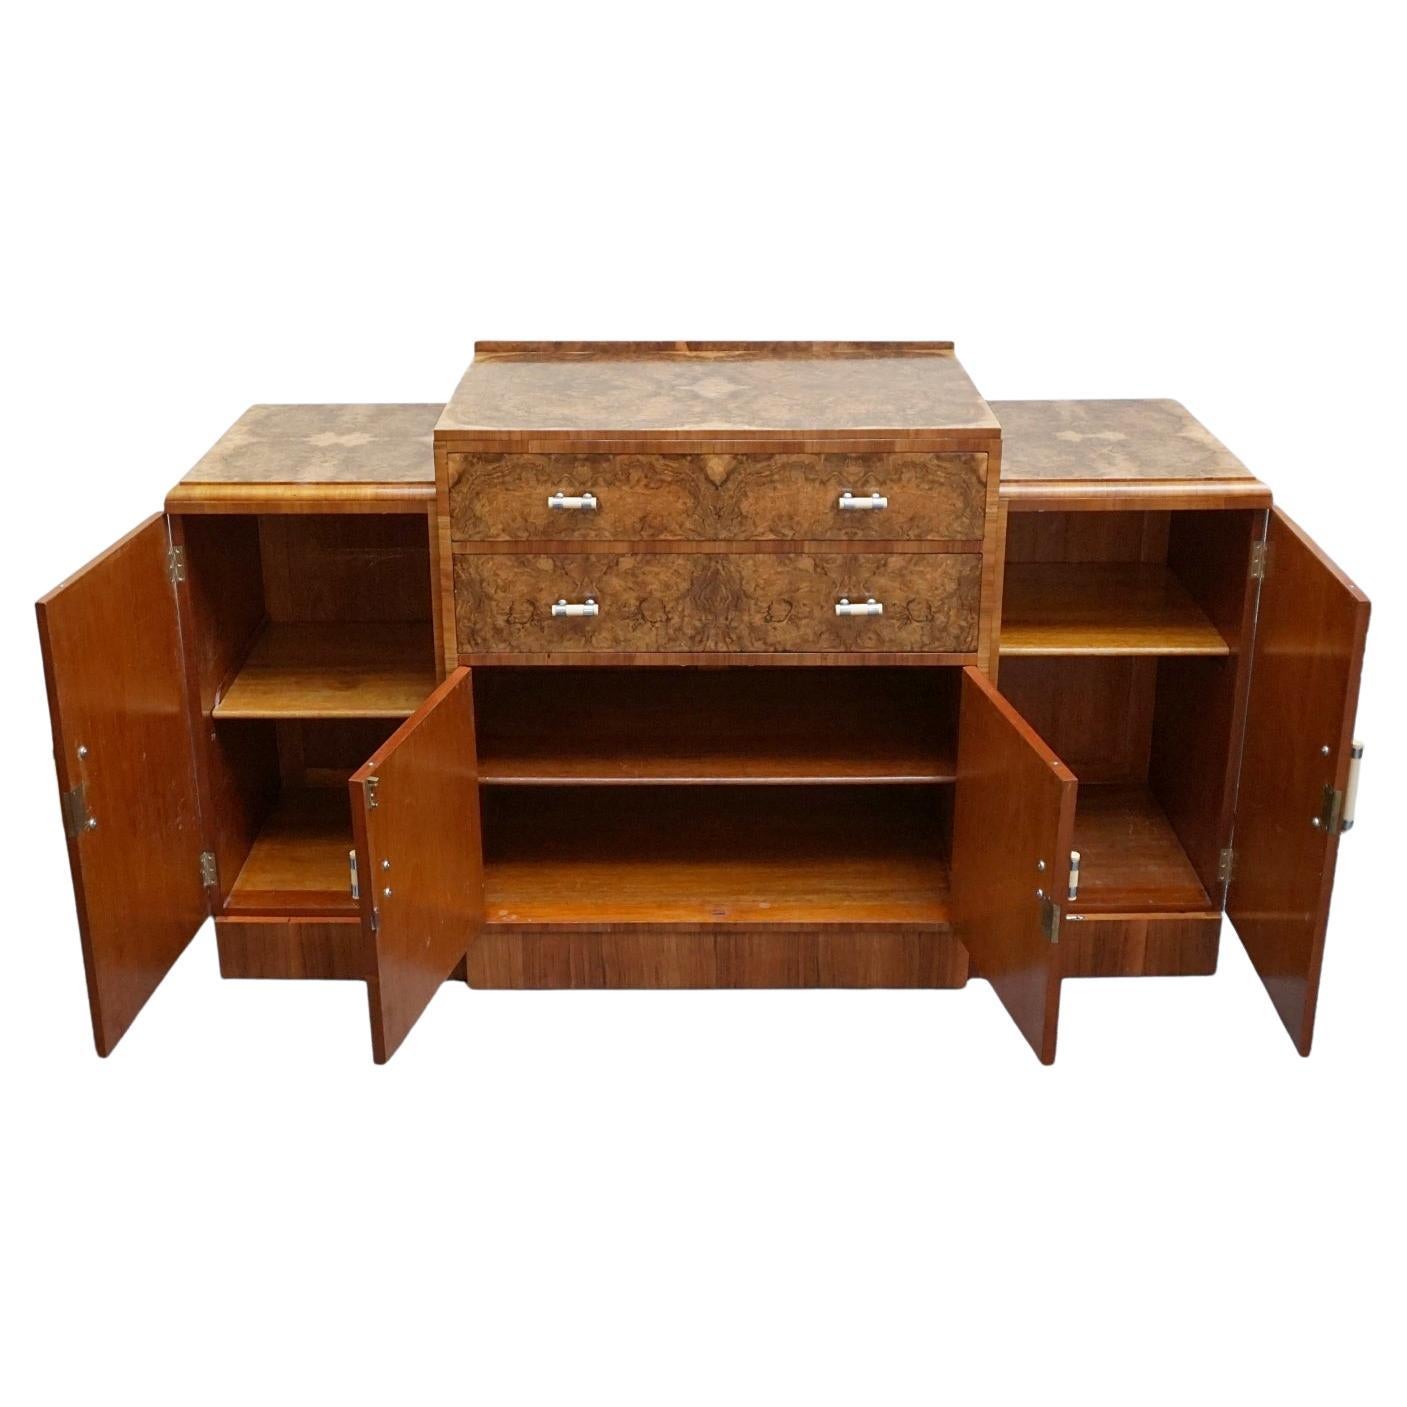 An Art Deco sideboard. Burr walnut veneered with figured walnut banding and original bakelite and metal handles. Two shelved cupboards to either side with central upper drawers and lower cabinet section.

Dimensions: H 95cm - 105.5cm W 183.5cm D